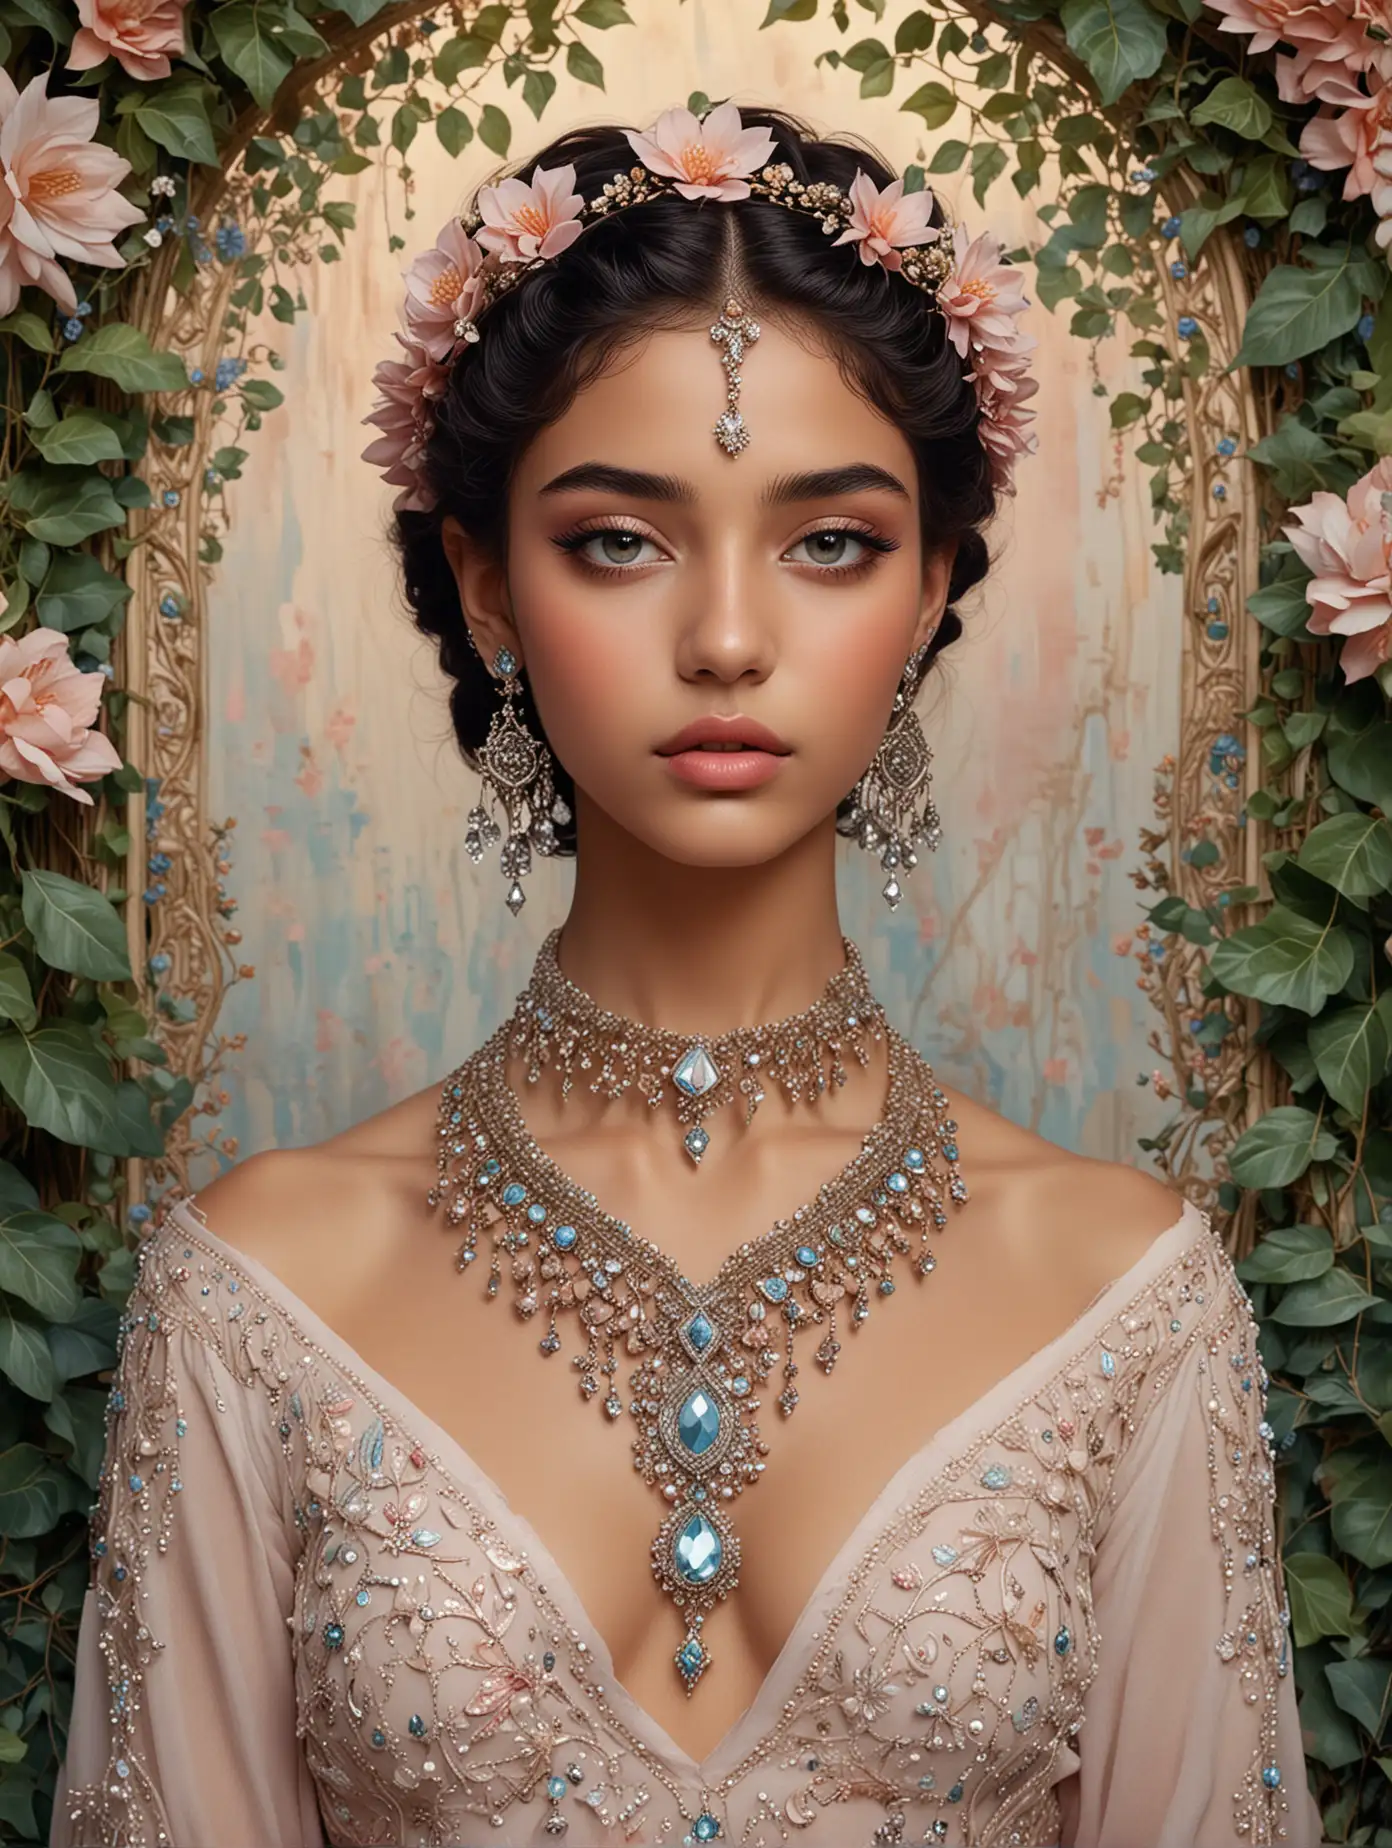 Exquisite-Nude-Arab-Tribal-Teen-Diamond-Painting-with-Pastel-Colors-and-Floral-Adornments